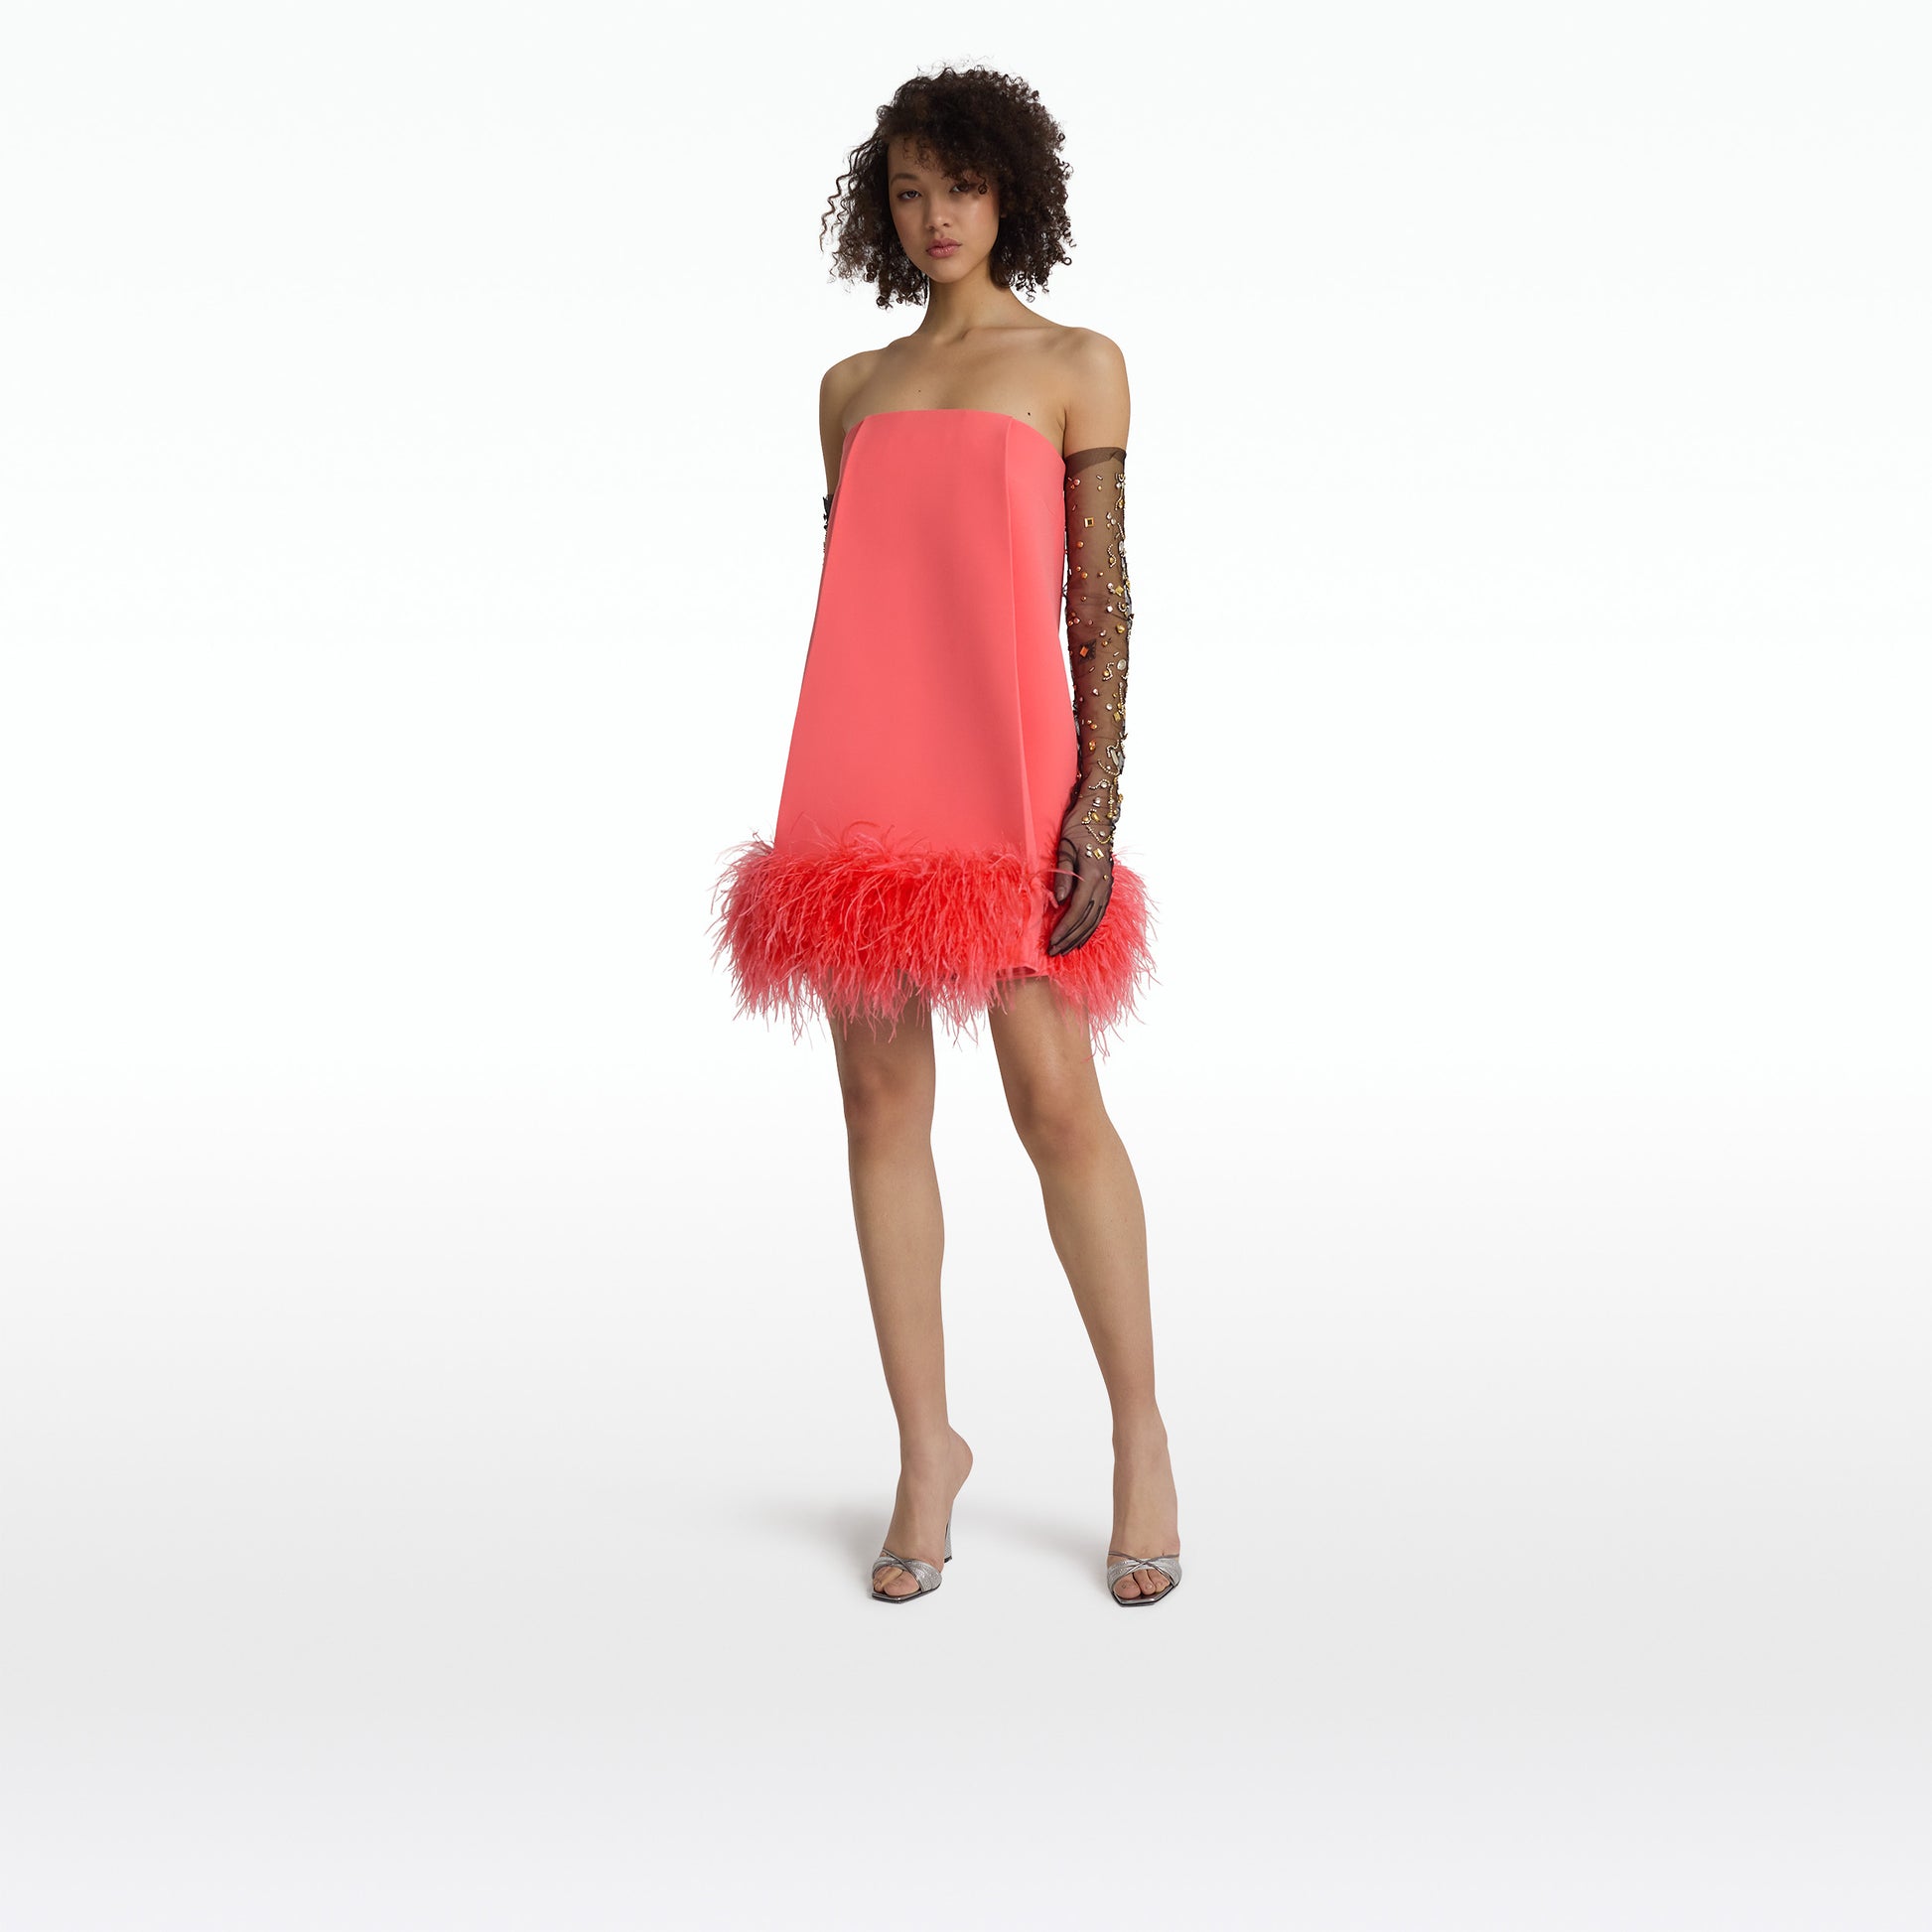 SQFMD495A-0Y - Velvet and Sequin Ostrich Feather Trim Dress